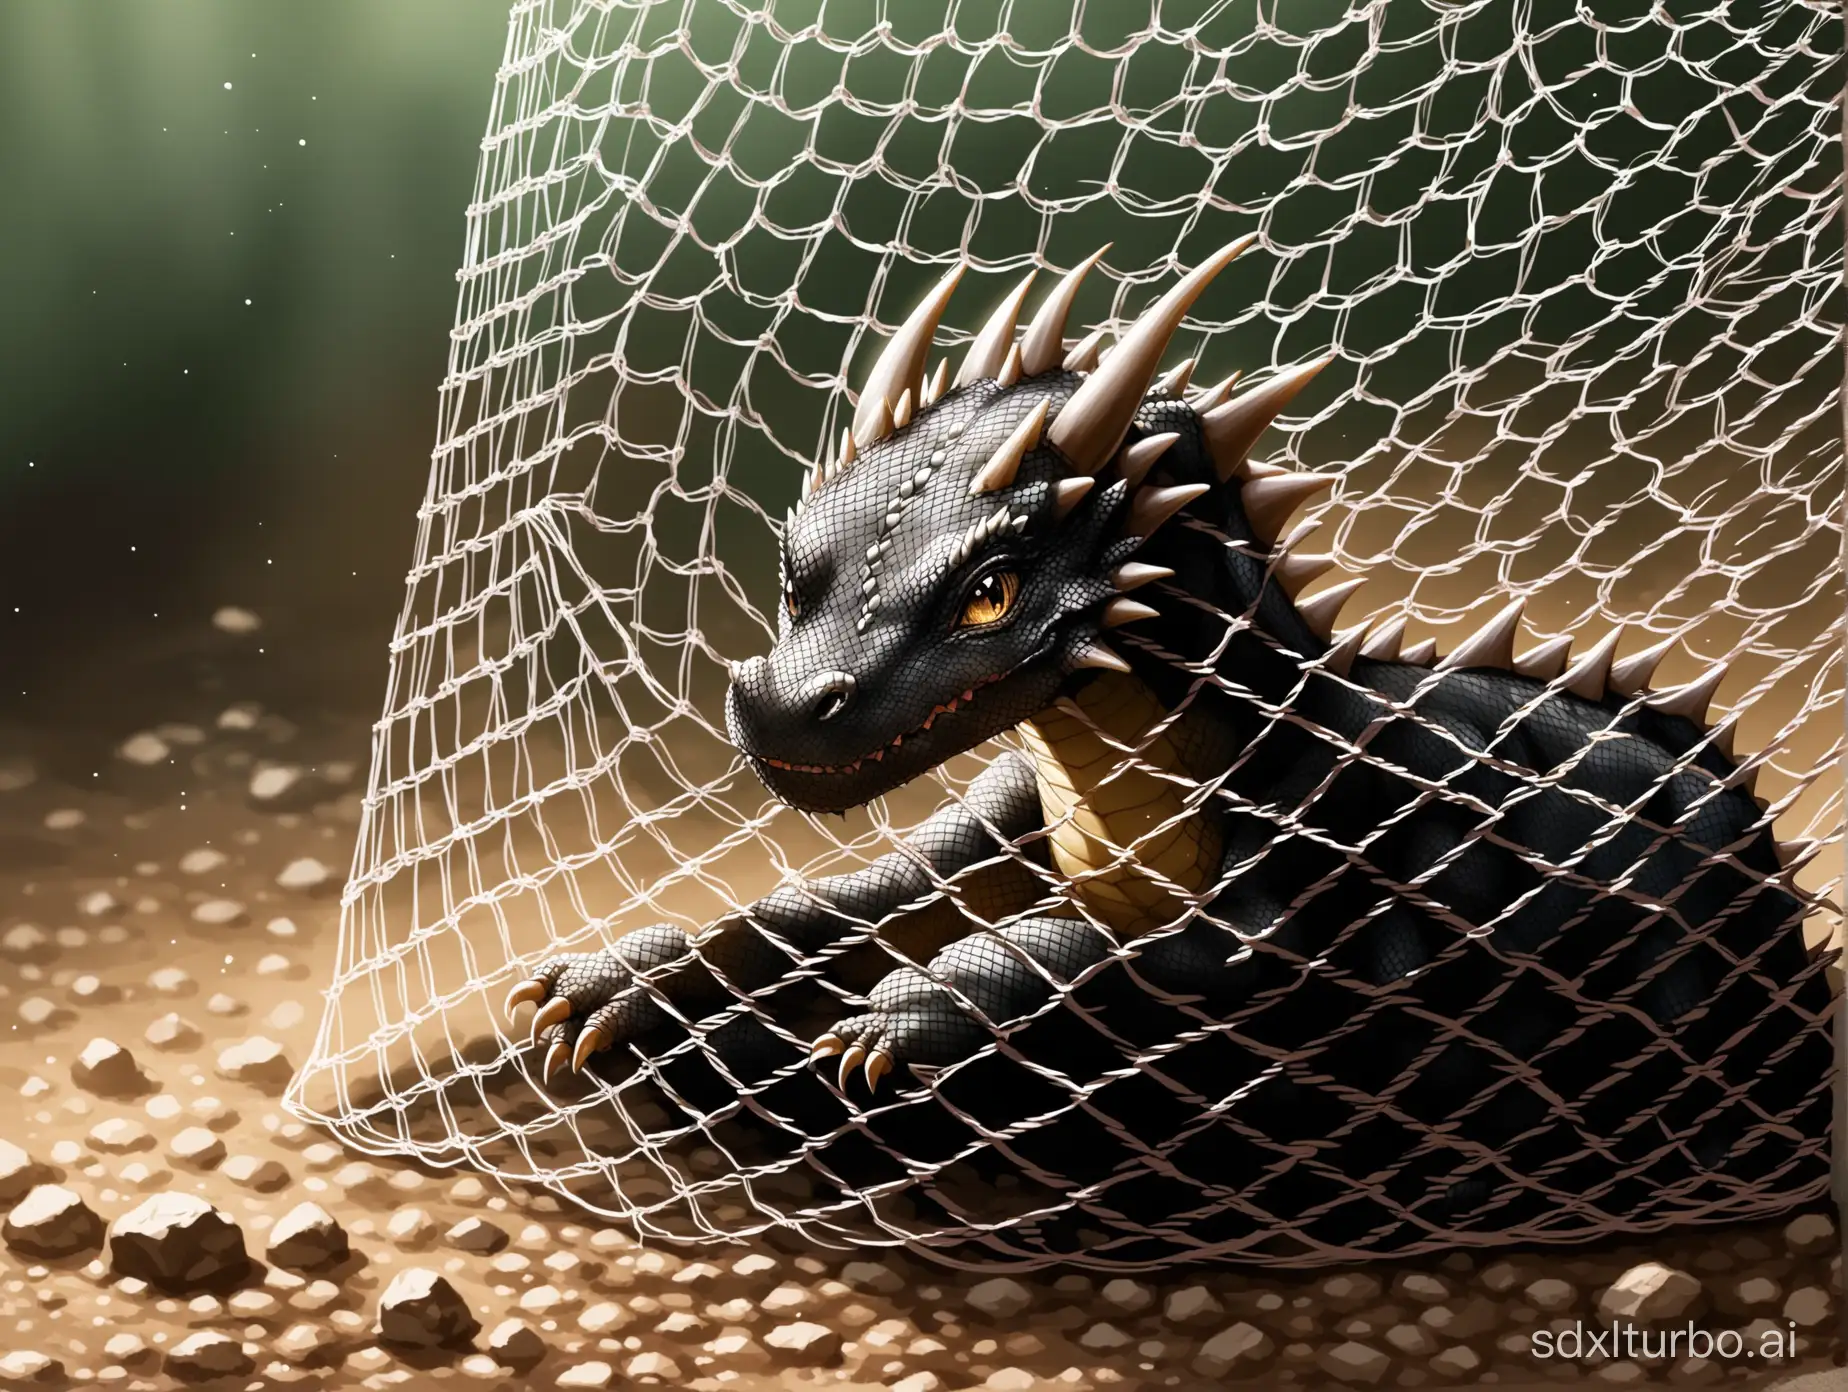 Little dragon trapped and wounded in a net